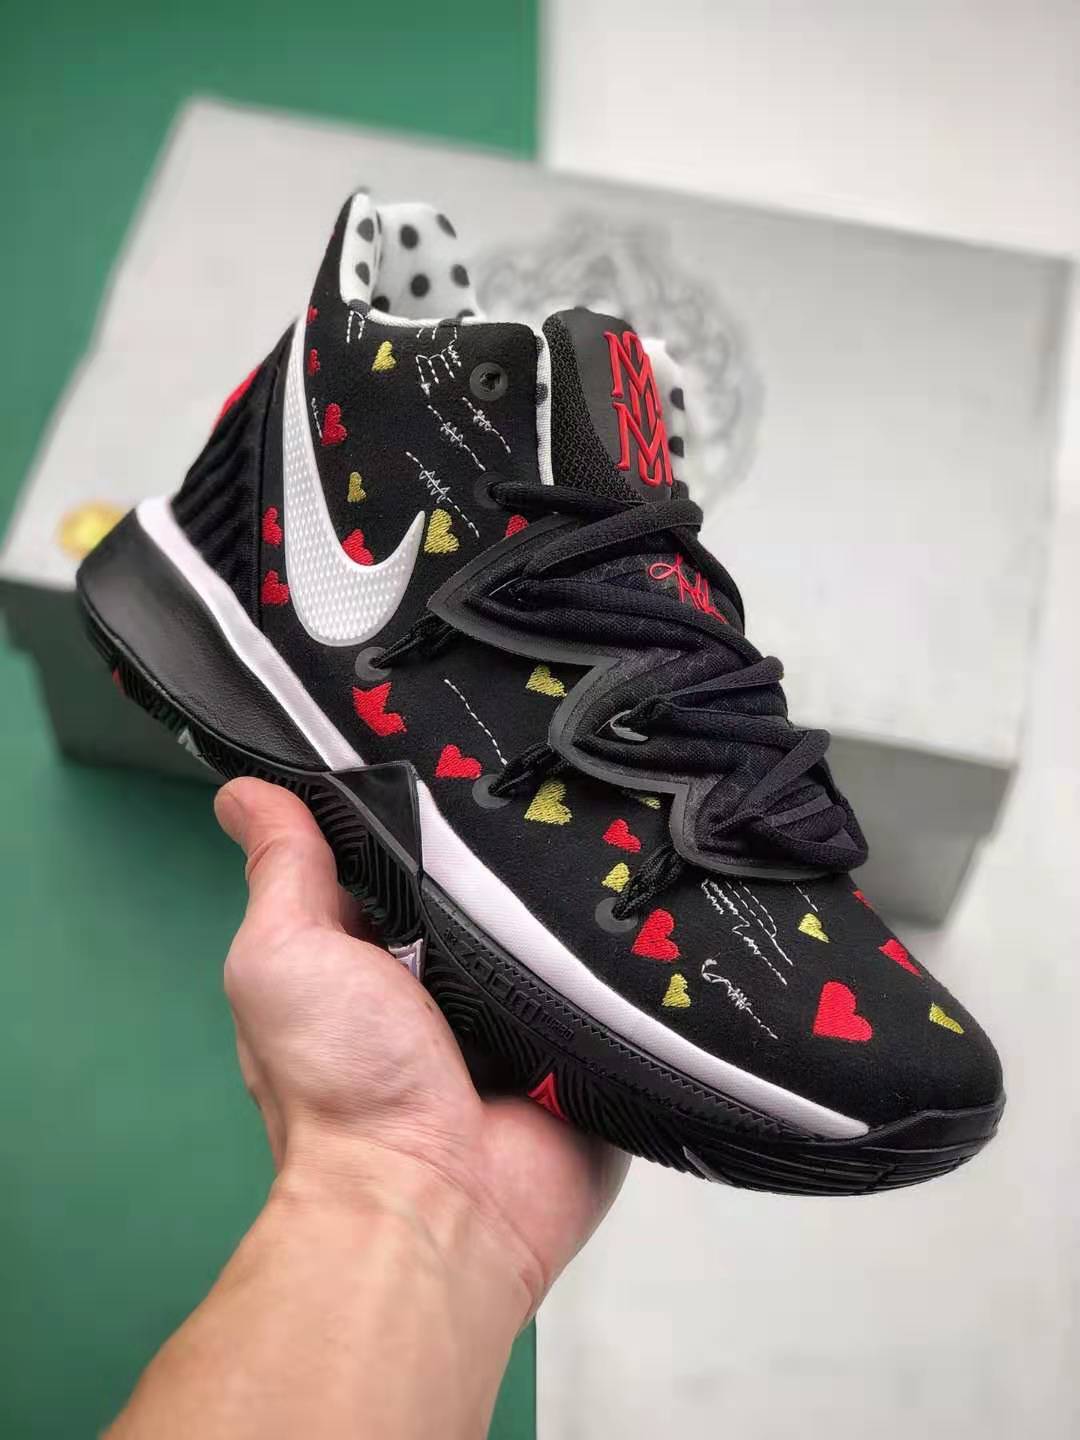 Nike Kyrie 5 EP Mother's Day Black AO2919-601 - Premium Basketball Sneakers